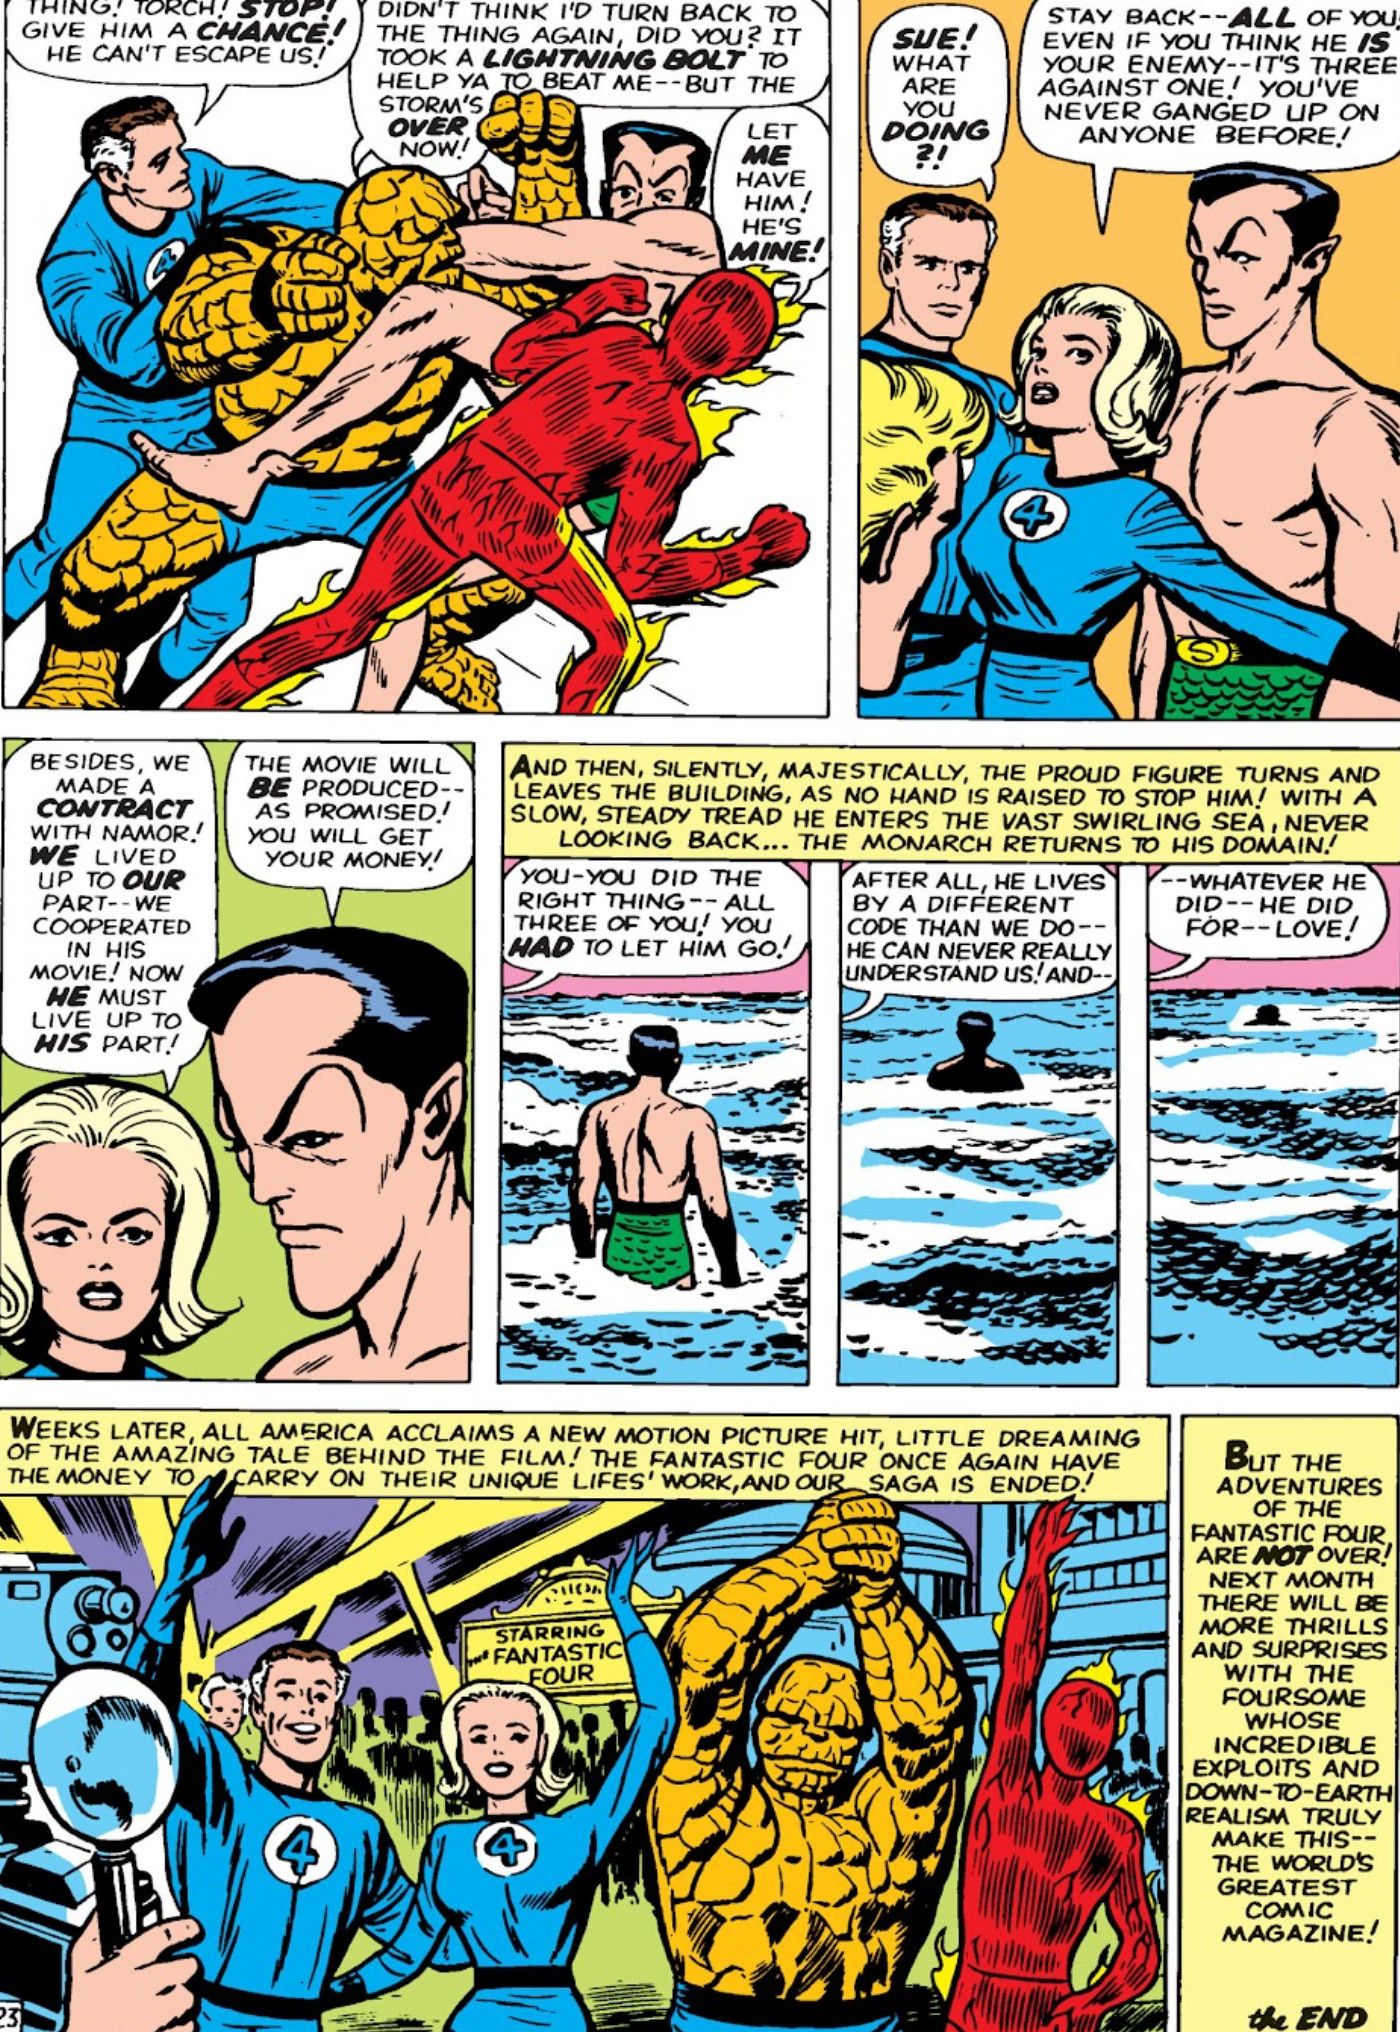 Namor makes a movie about the Fantastif Four